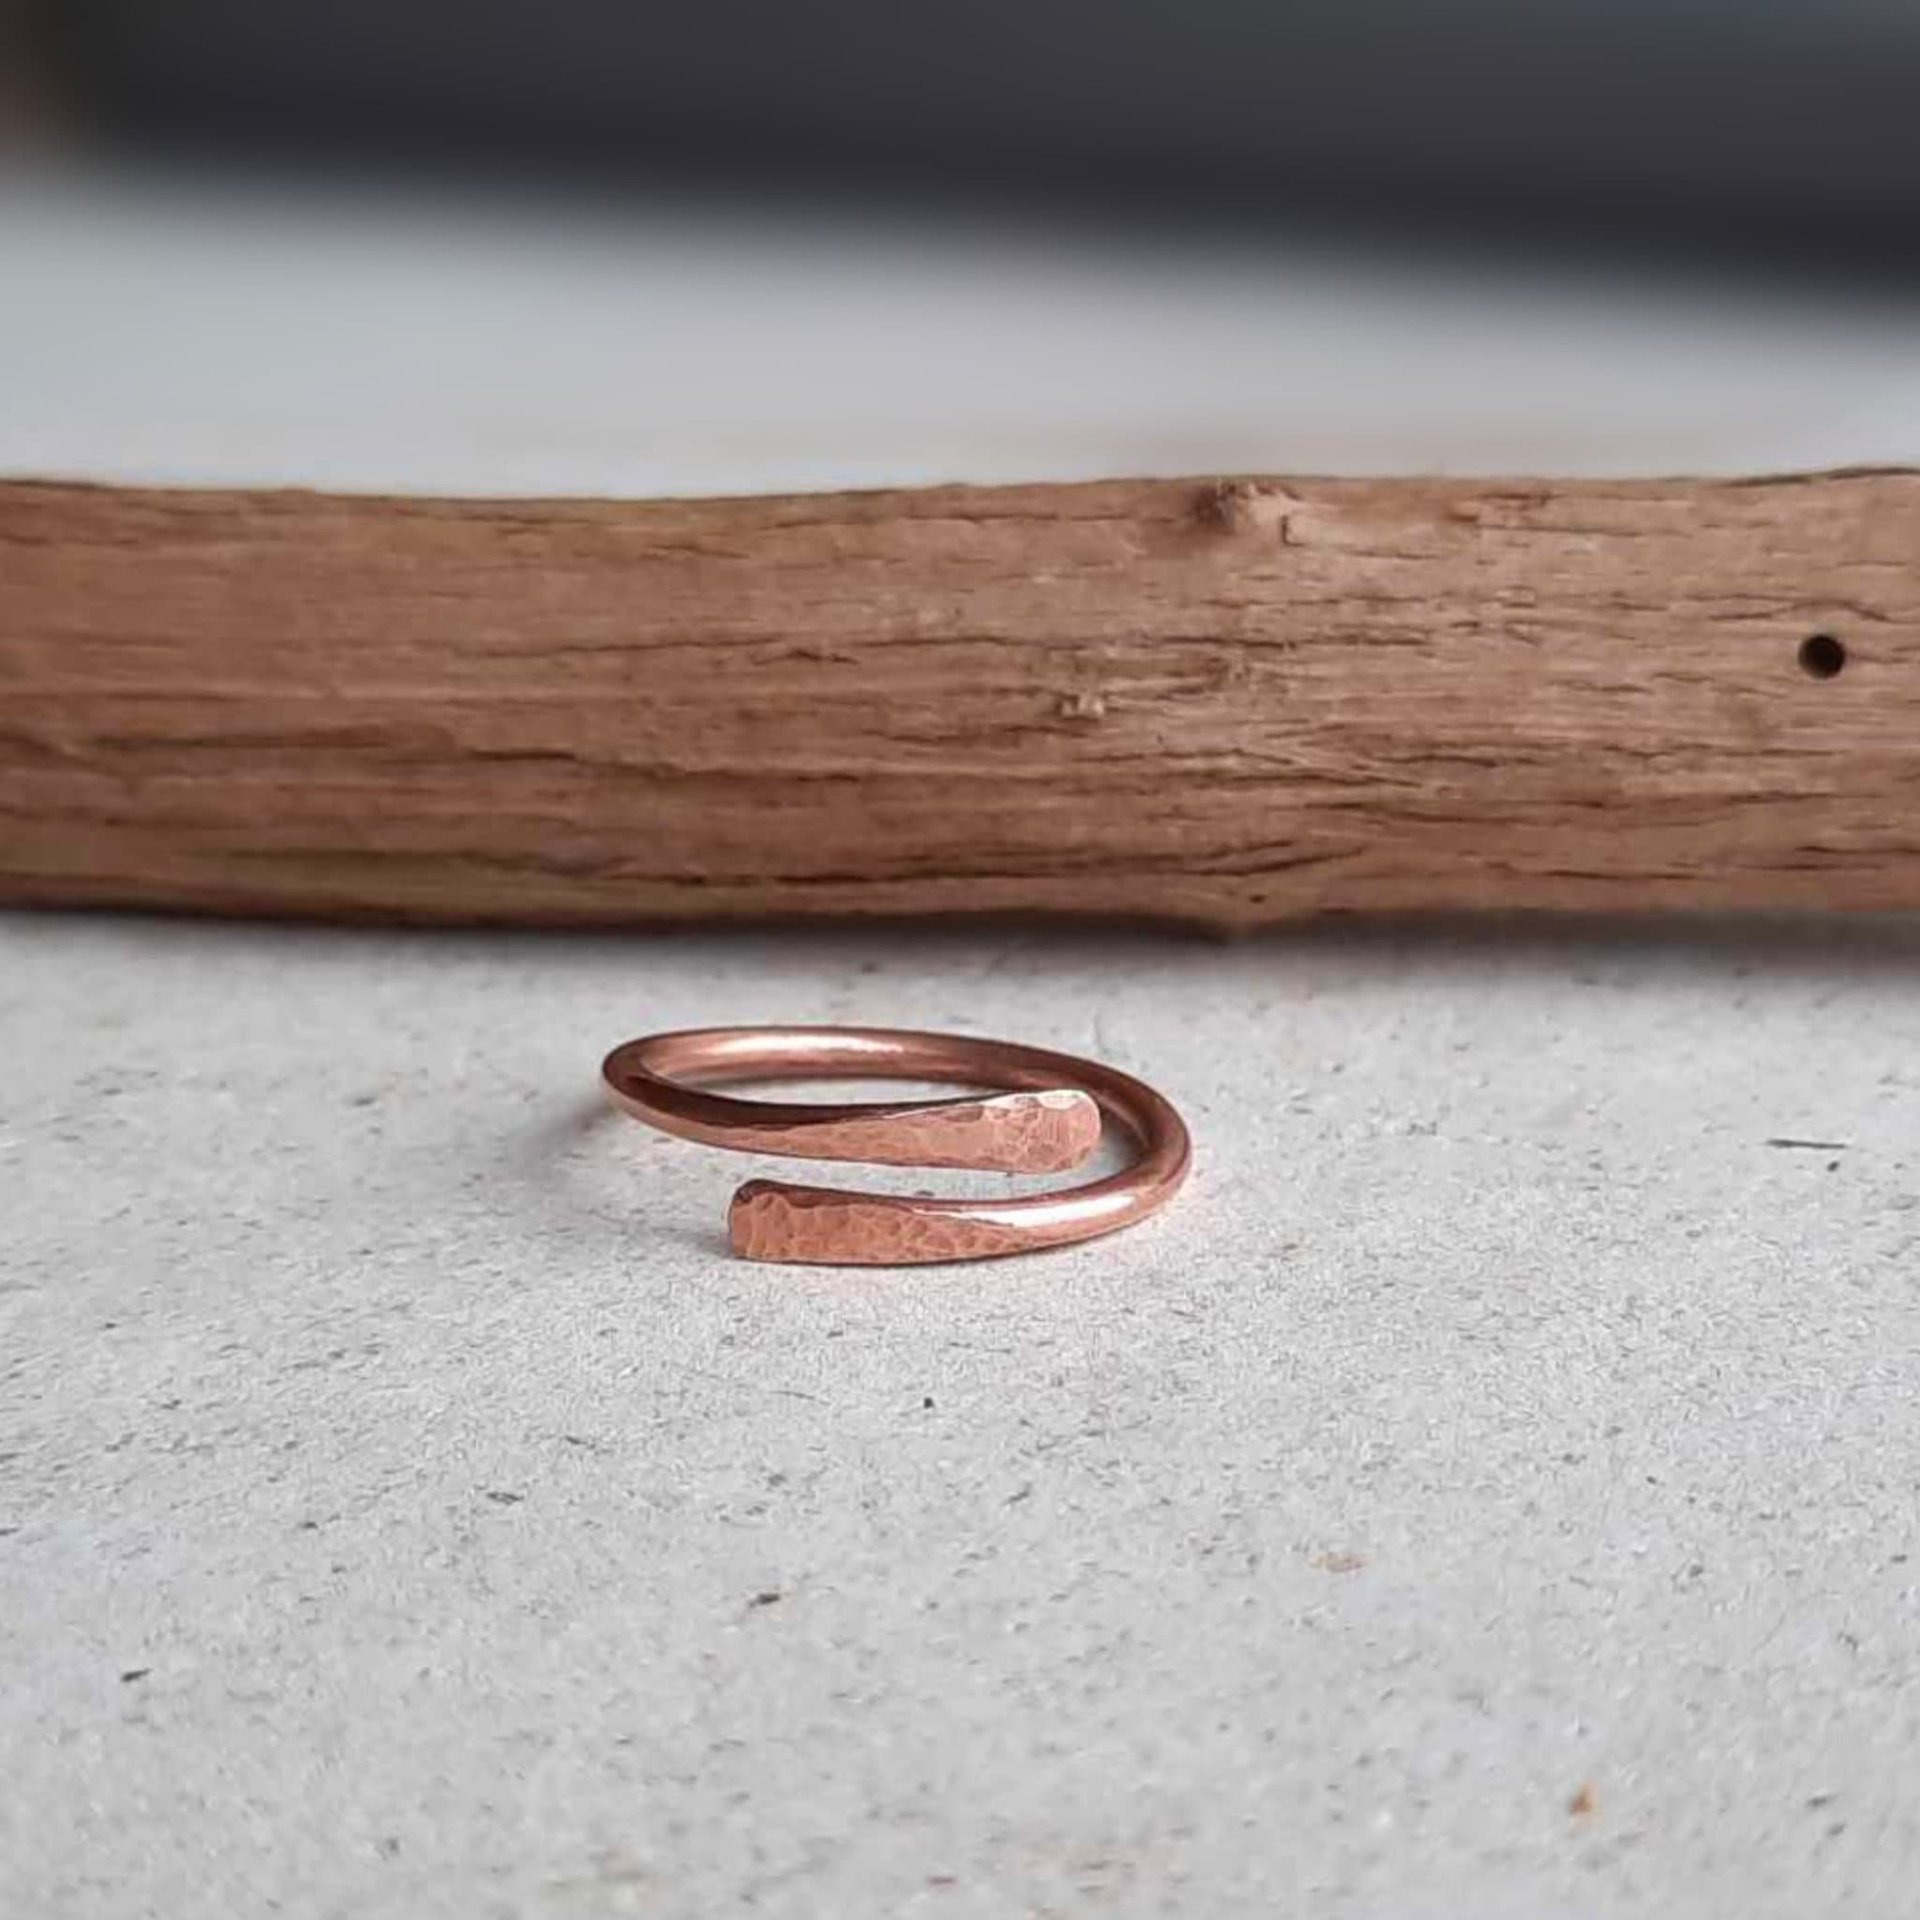 Slim hammered copper wrap ring, hand made by The Tiny Tree Frog Jewellery